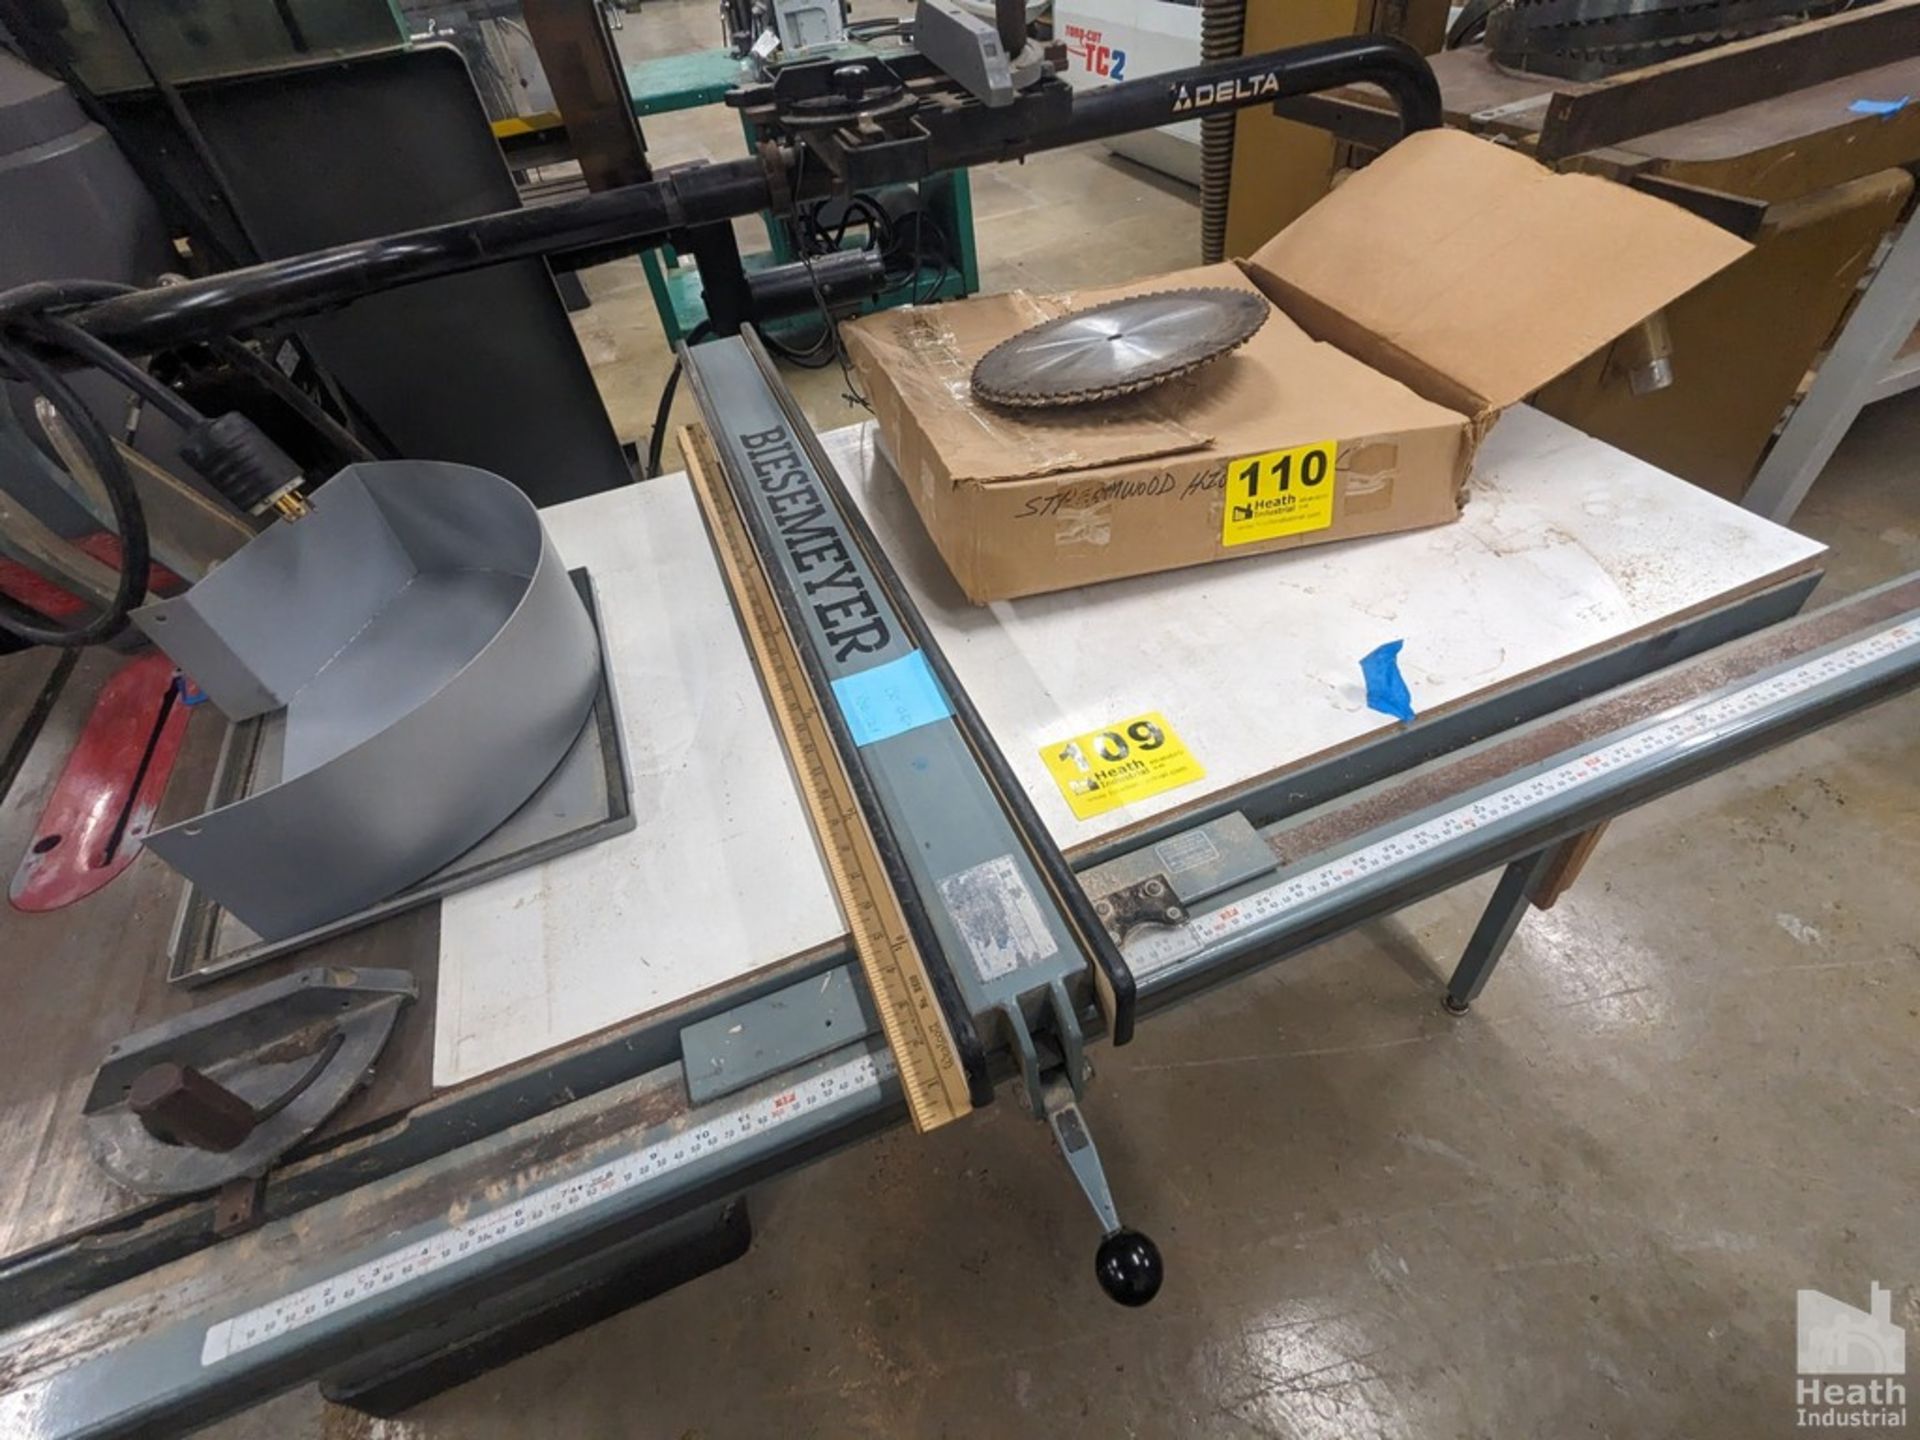 DELTA UNISAW 10" TILTING ARBOR TABLE SAW WITH EXTENDED TABLE BEISEMETER FENCE Loading Fee :$100 - Image 6 of 8